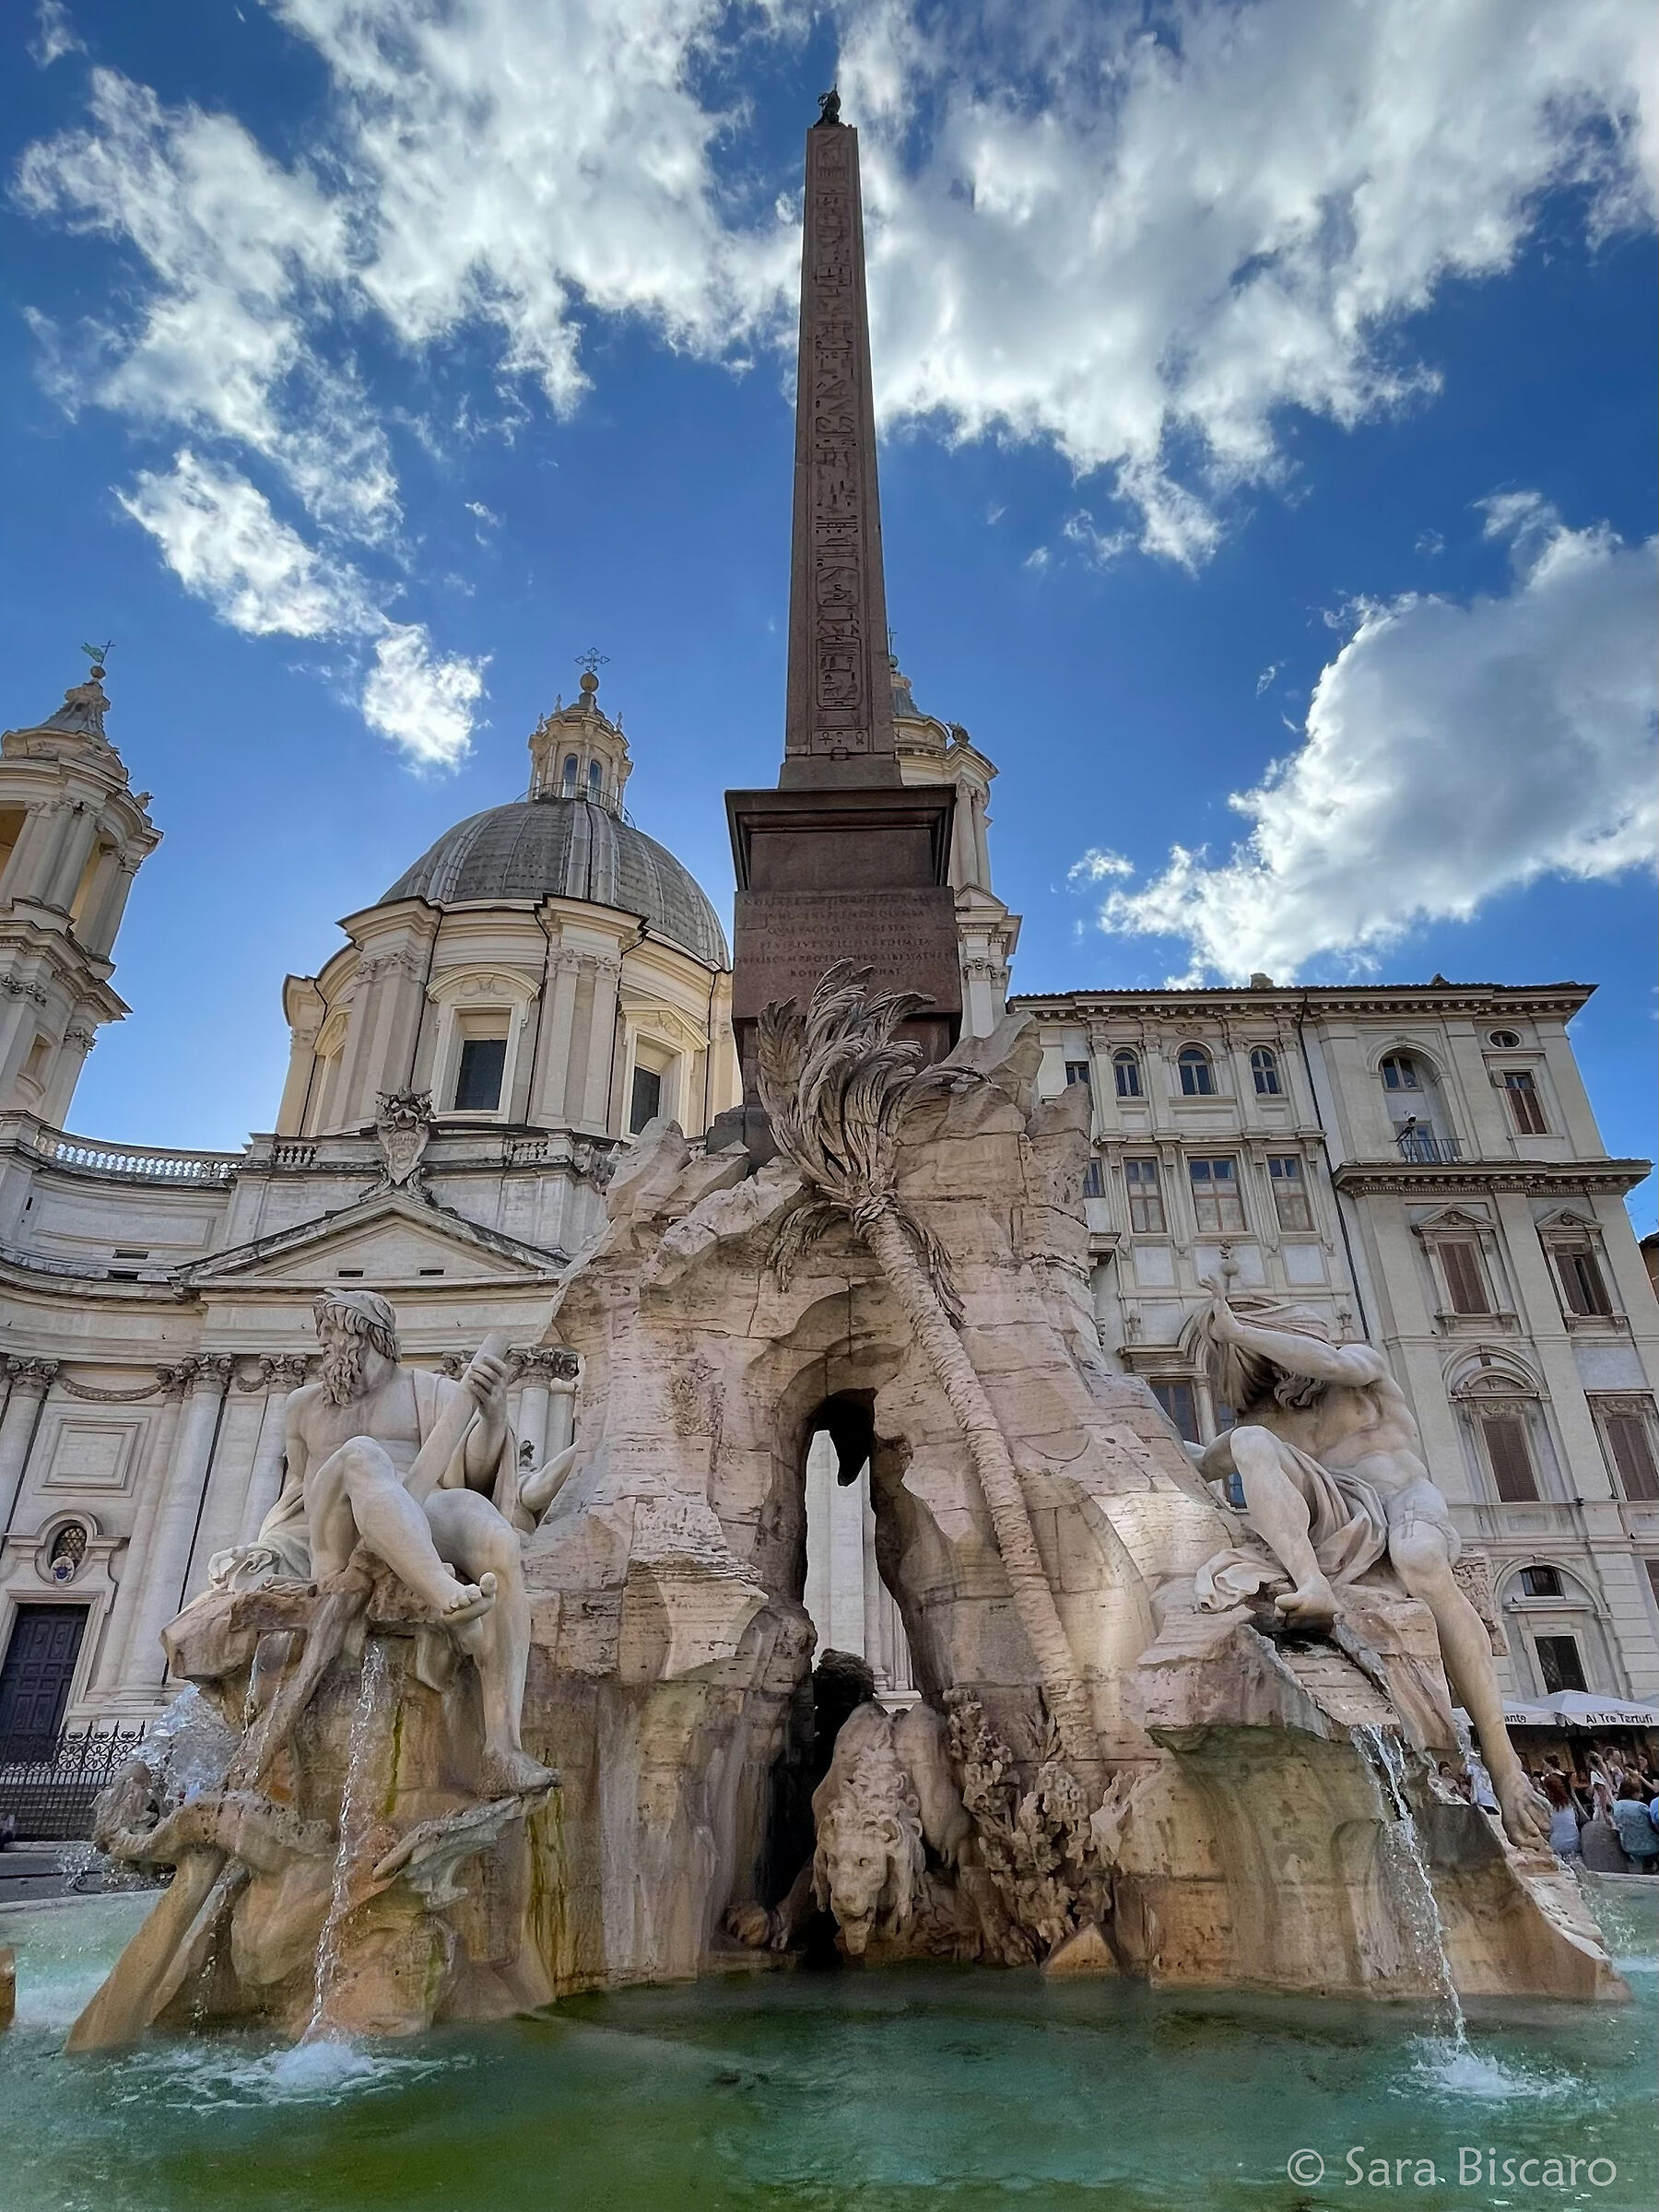 The Fountain of the Four Rivers in Piazza Navona...